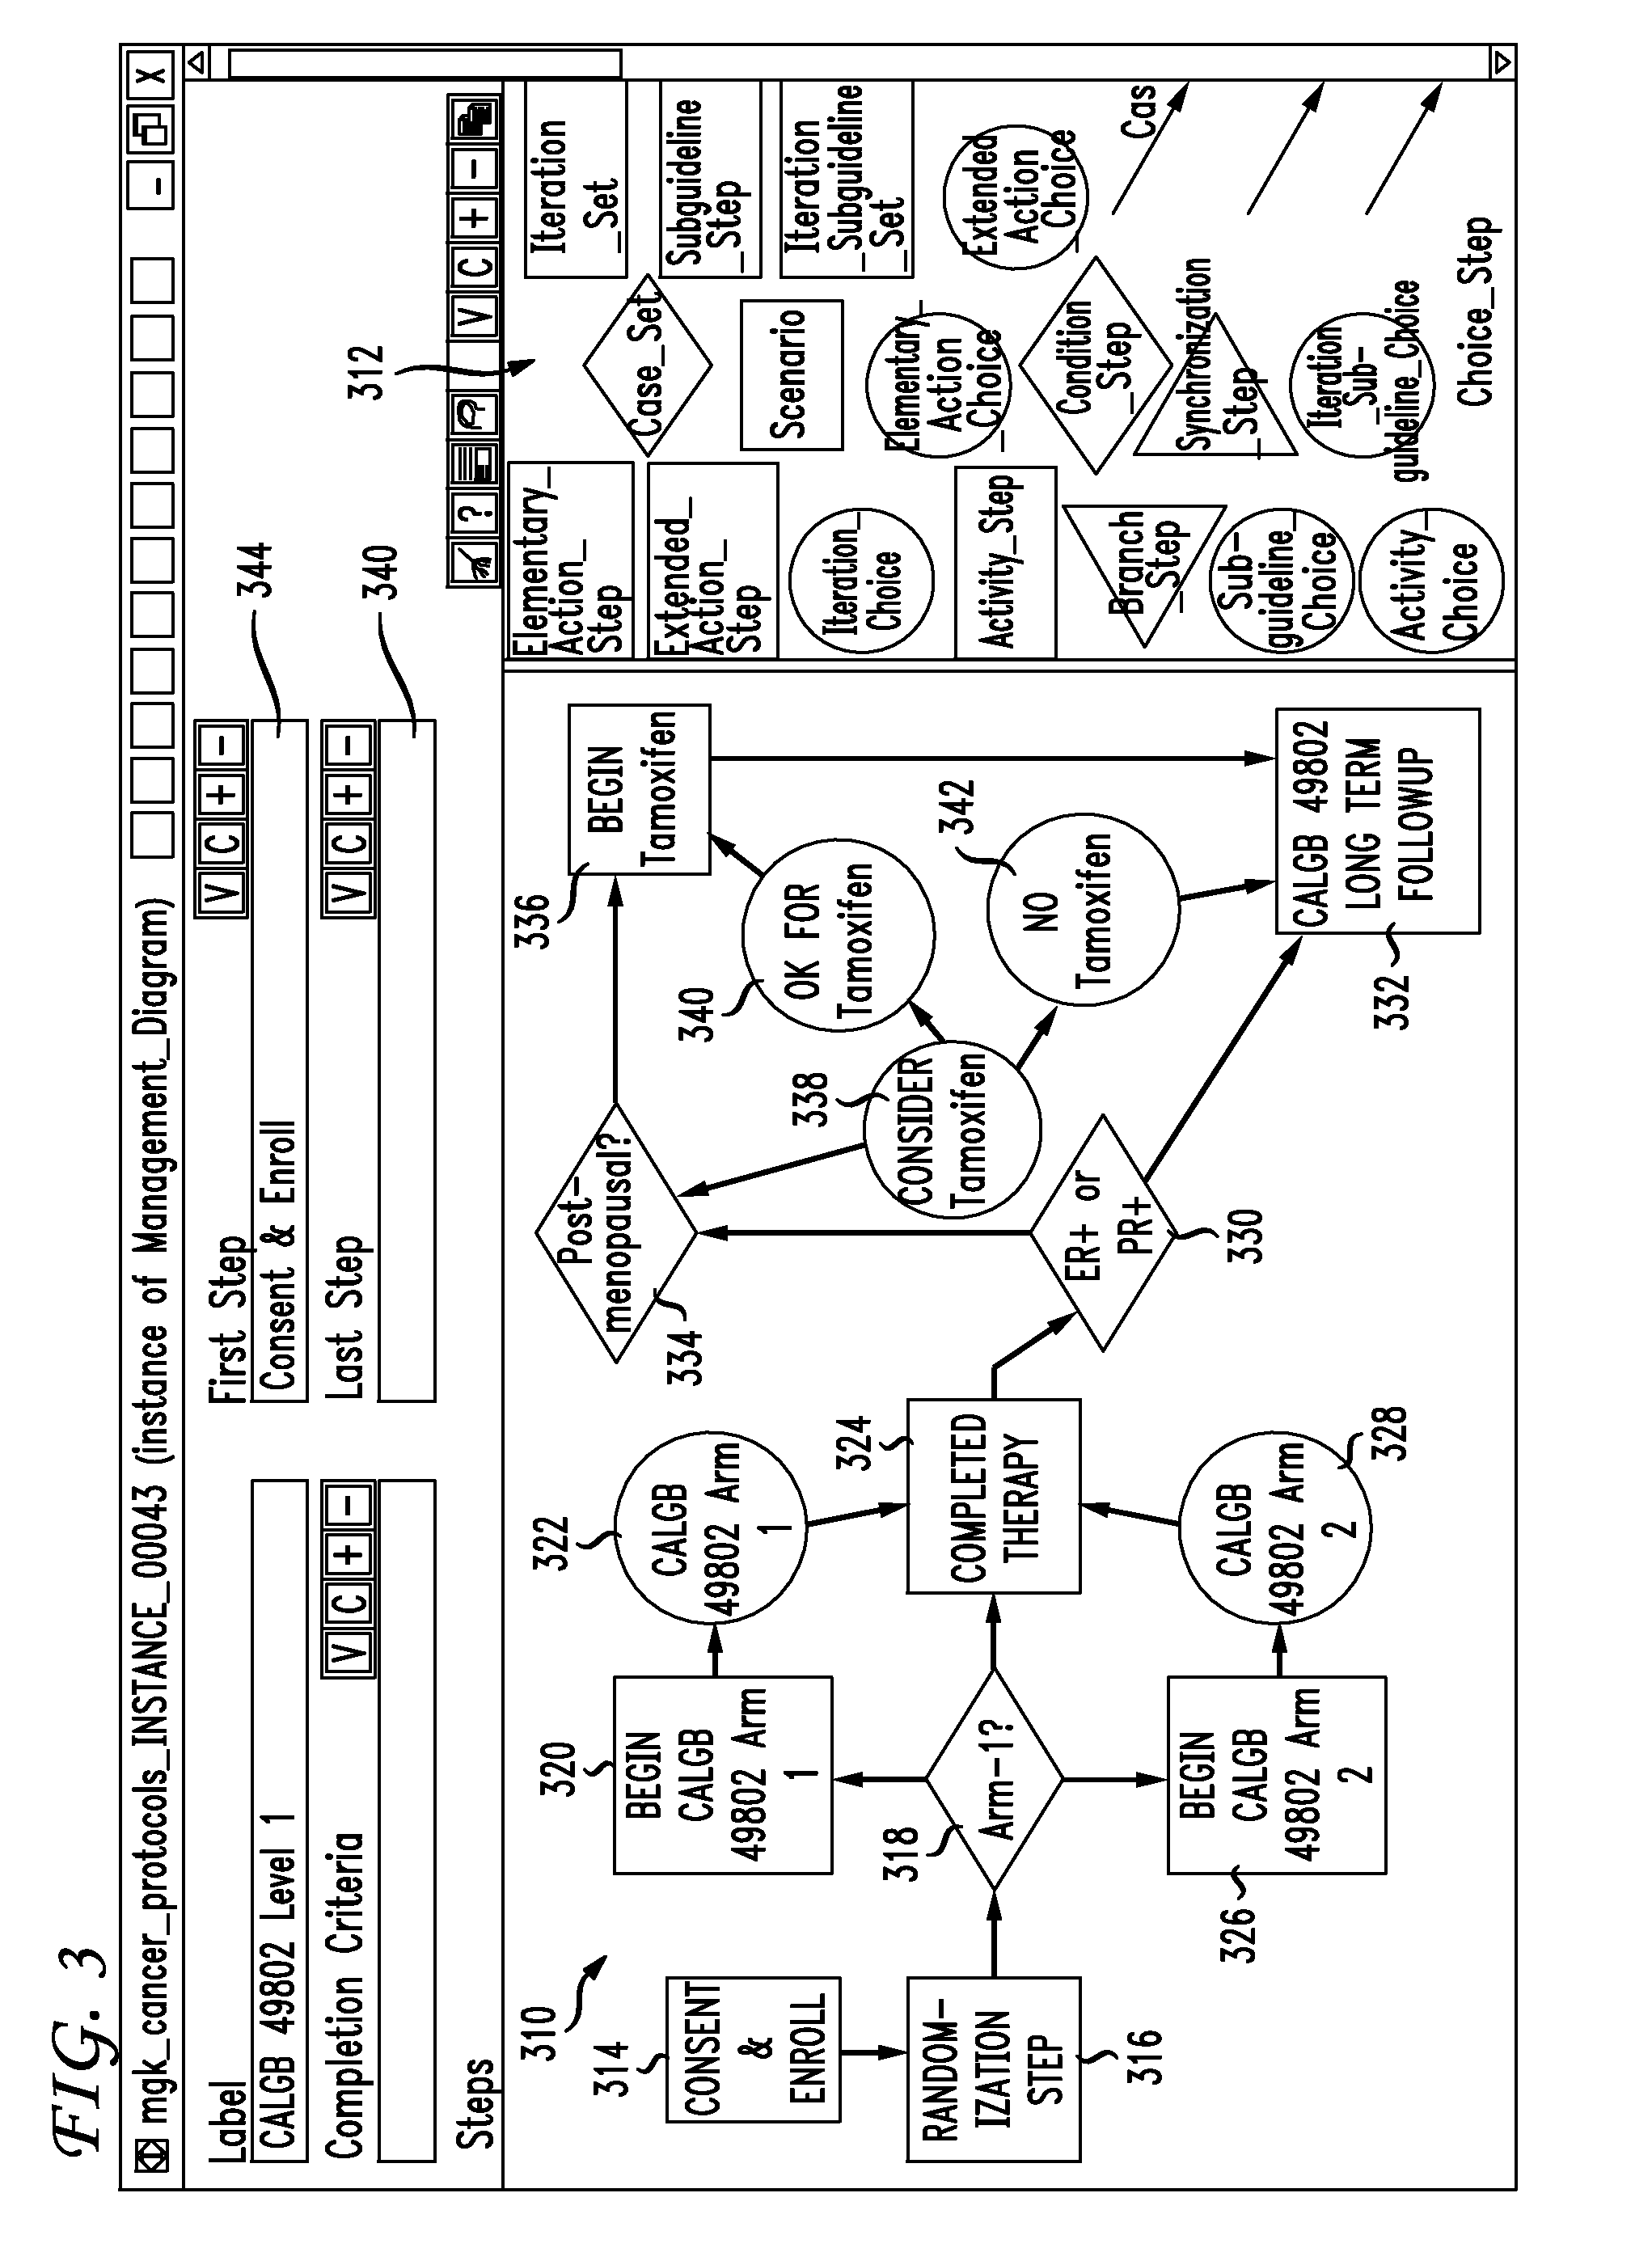 Clinical trials management system and method